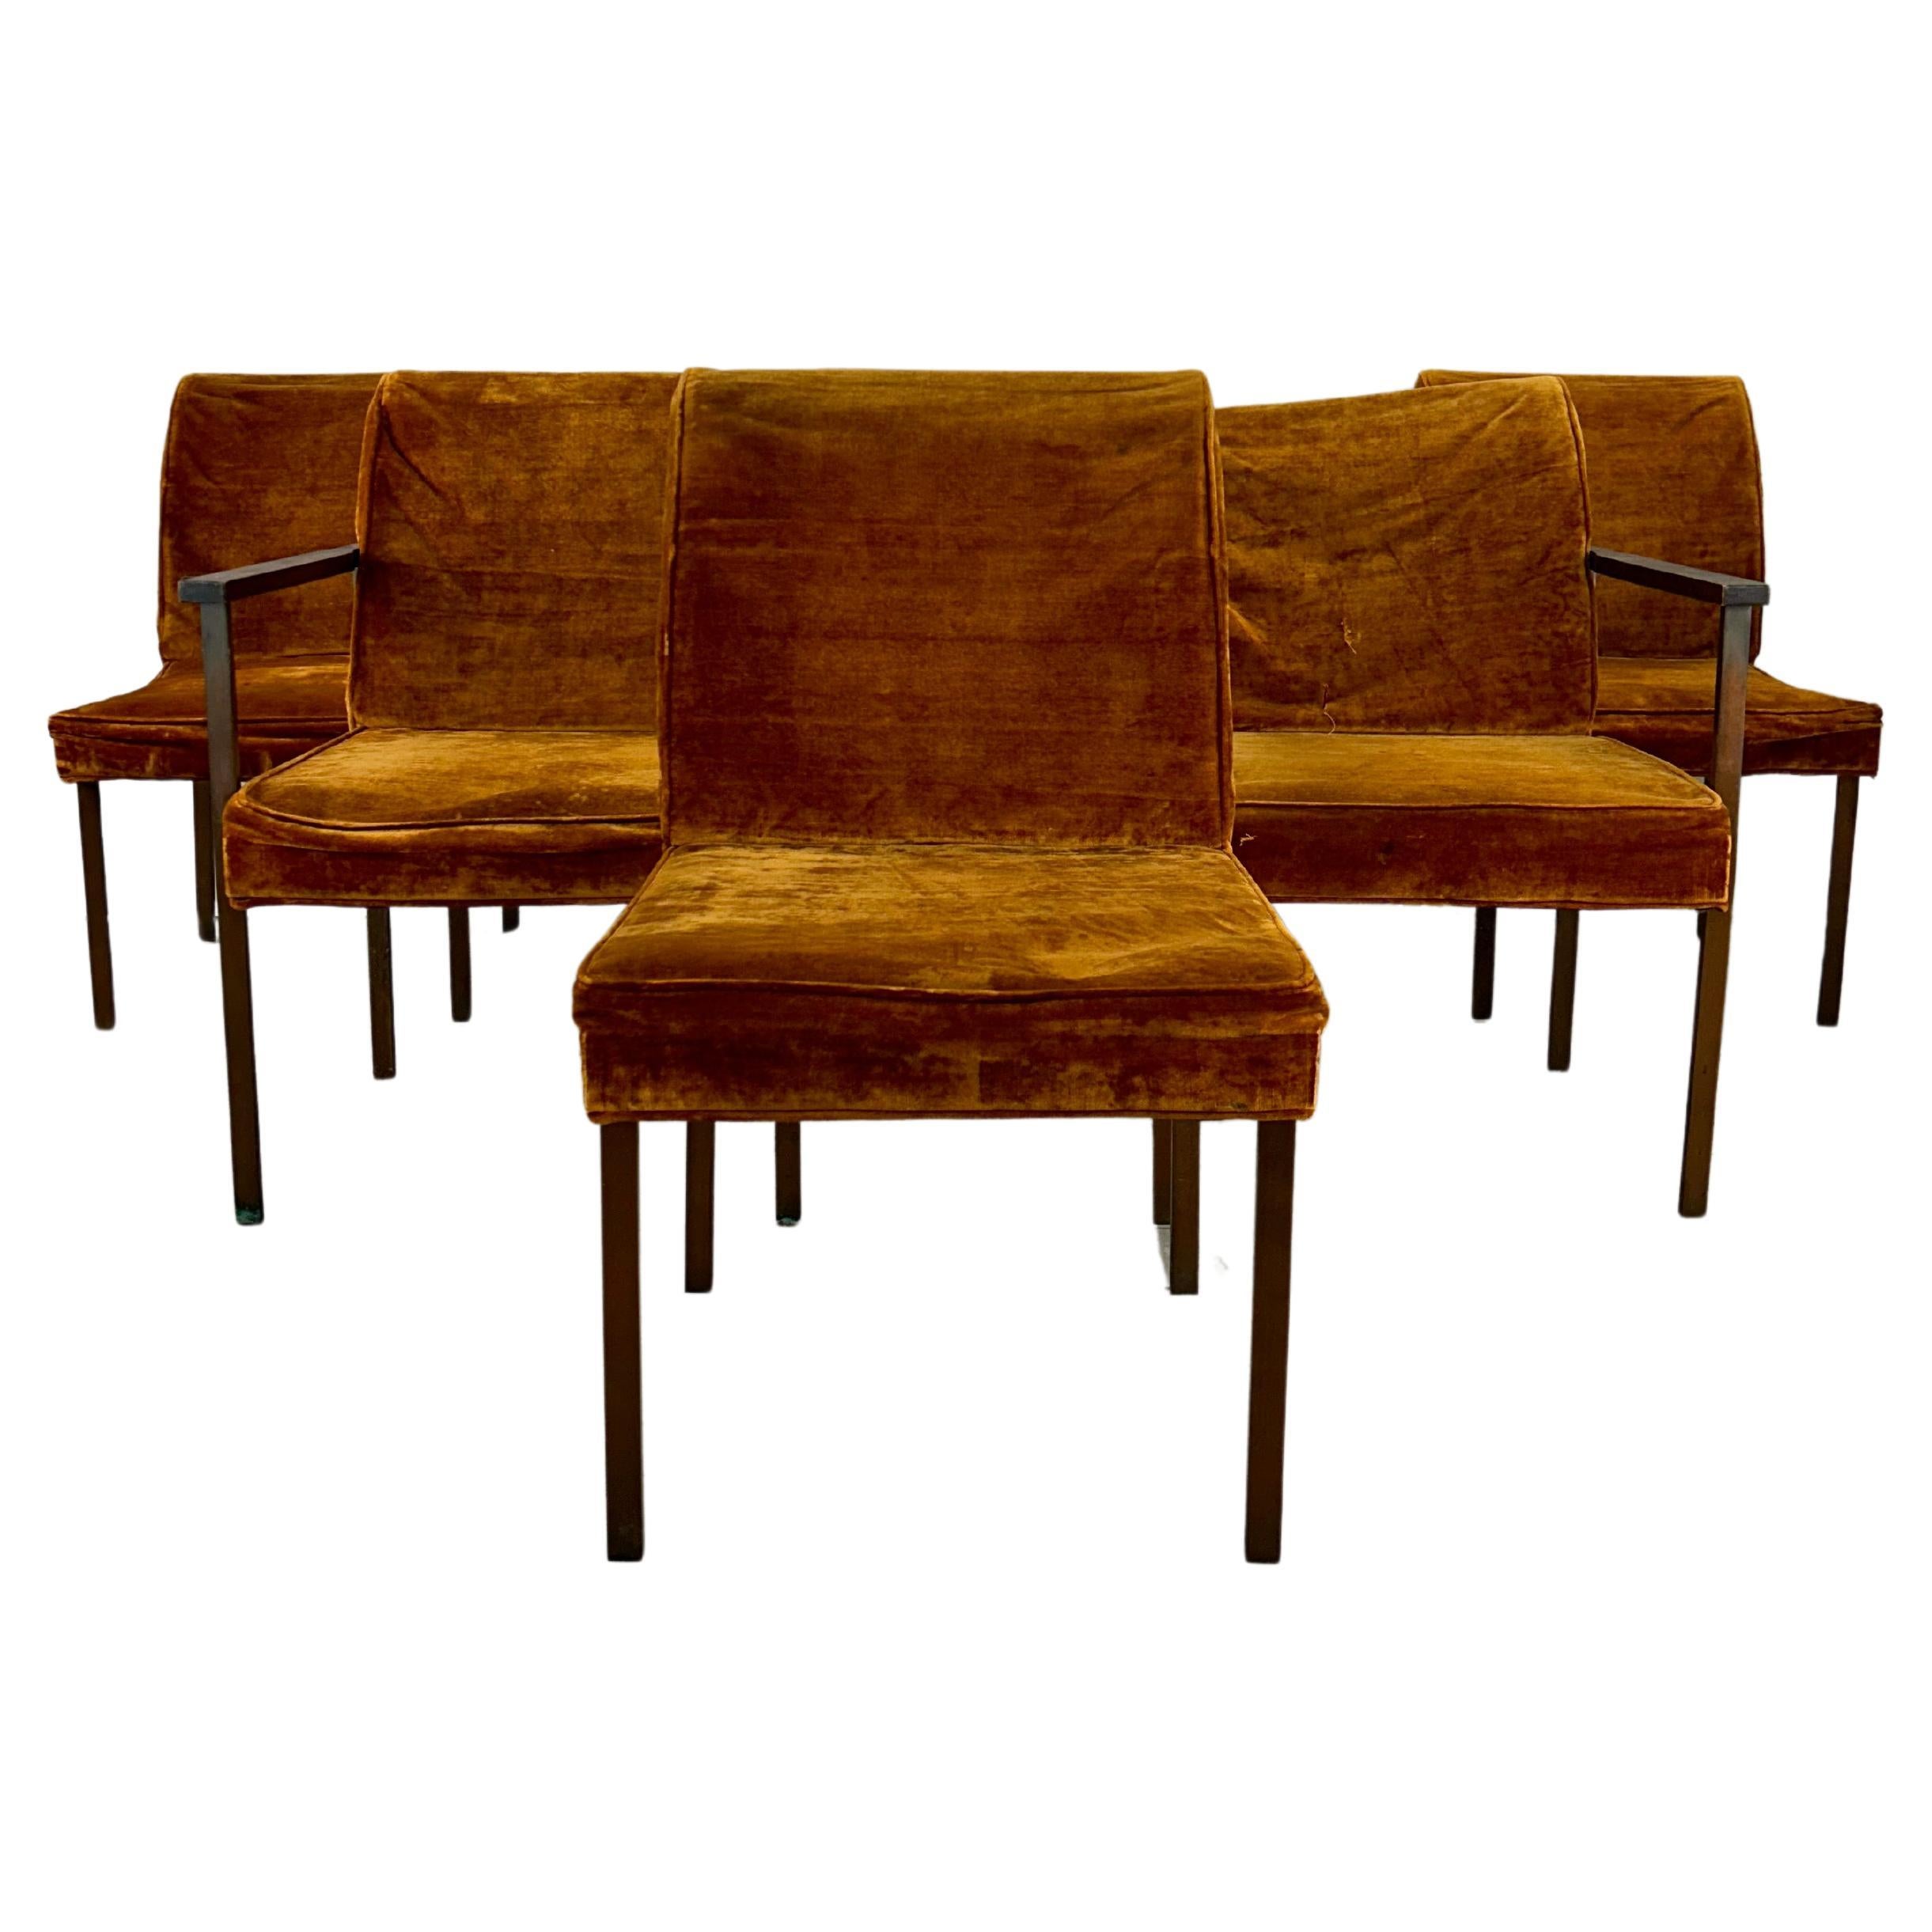 Set of 6 Mid Century Dining Chairs by Lane Furniture